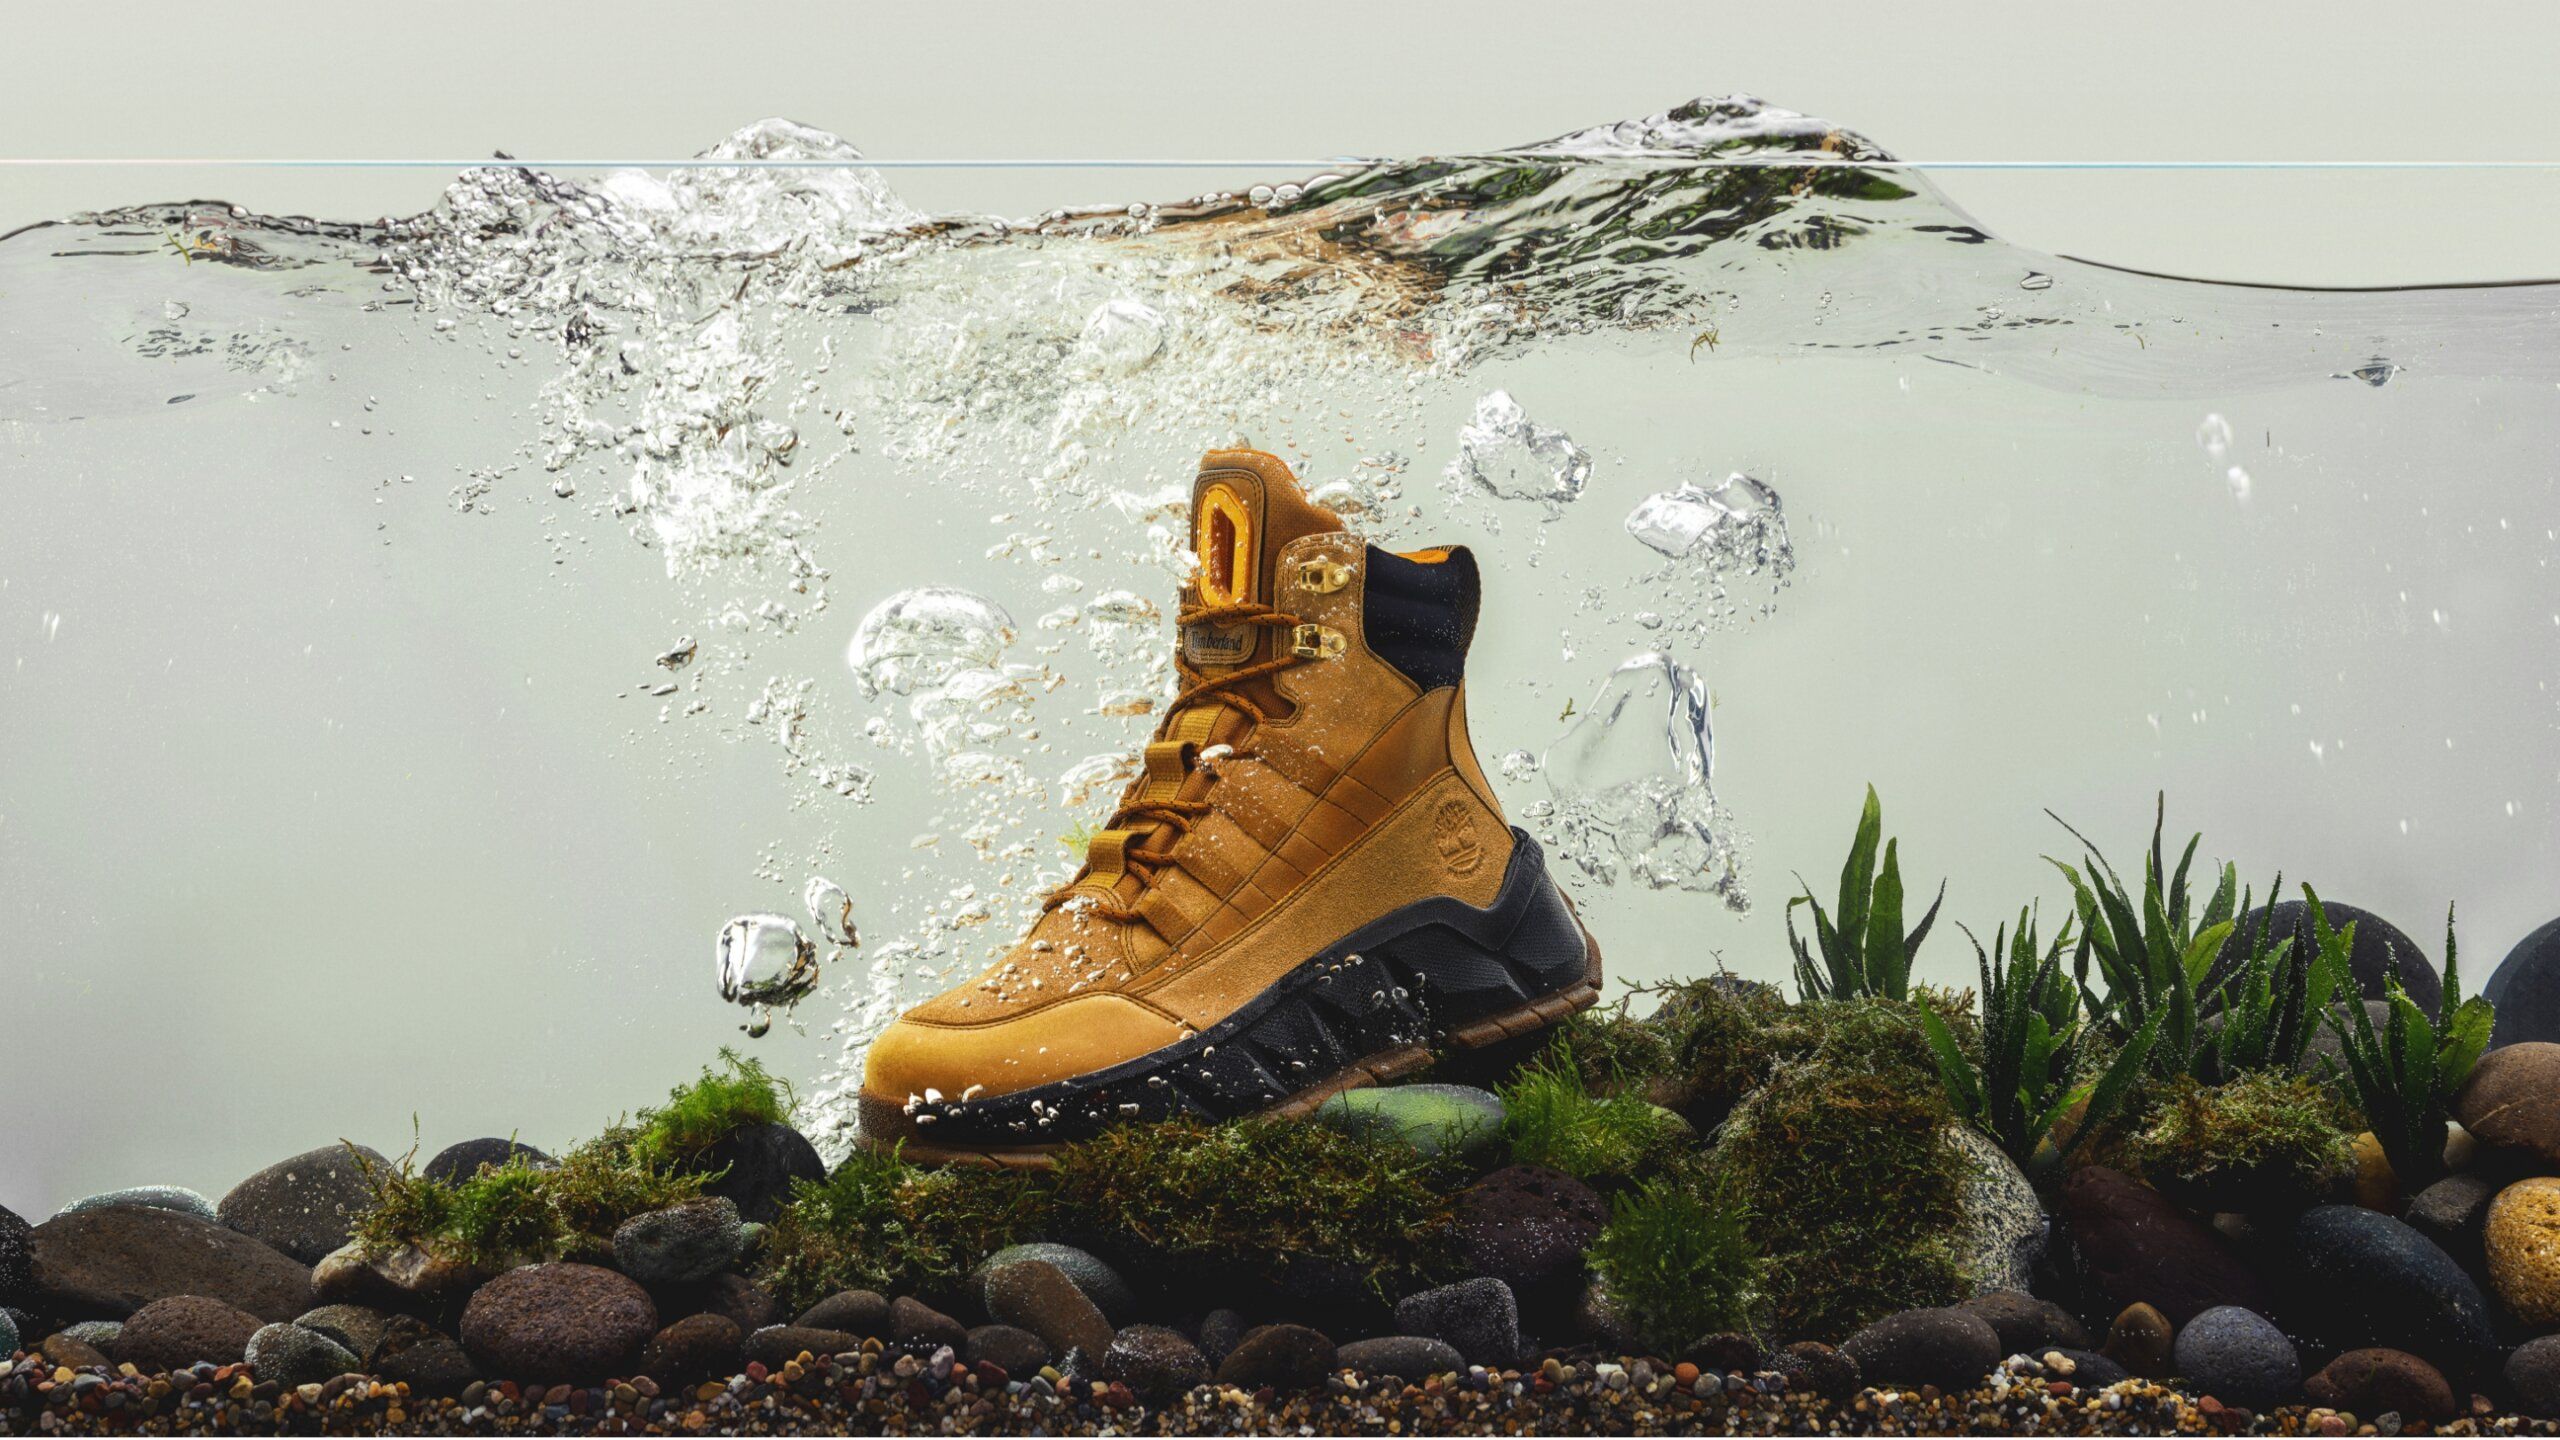 Timberland Greenstride Turbo TBL waterproof boot in water tank with rocks and plants at bottom